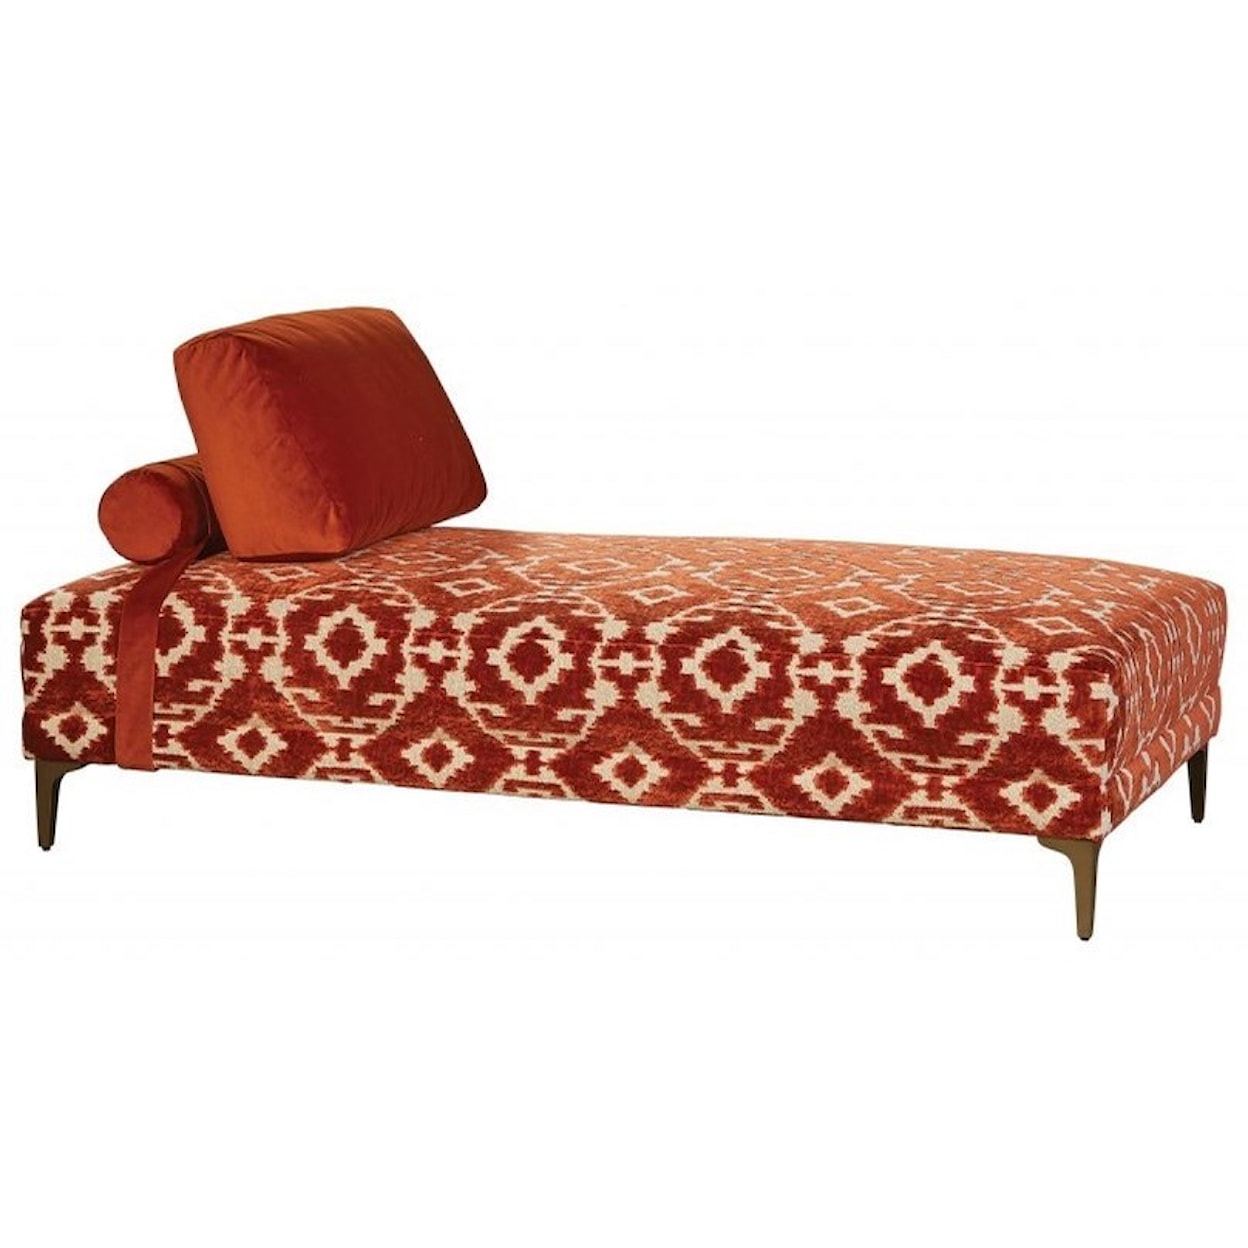 Jonathan Louis Lola Daybed